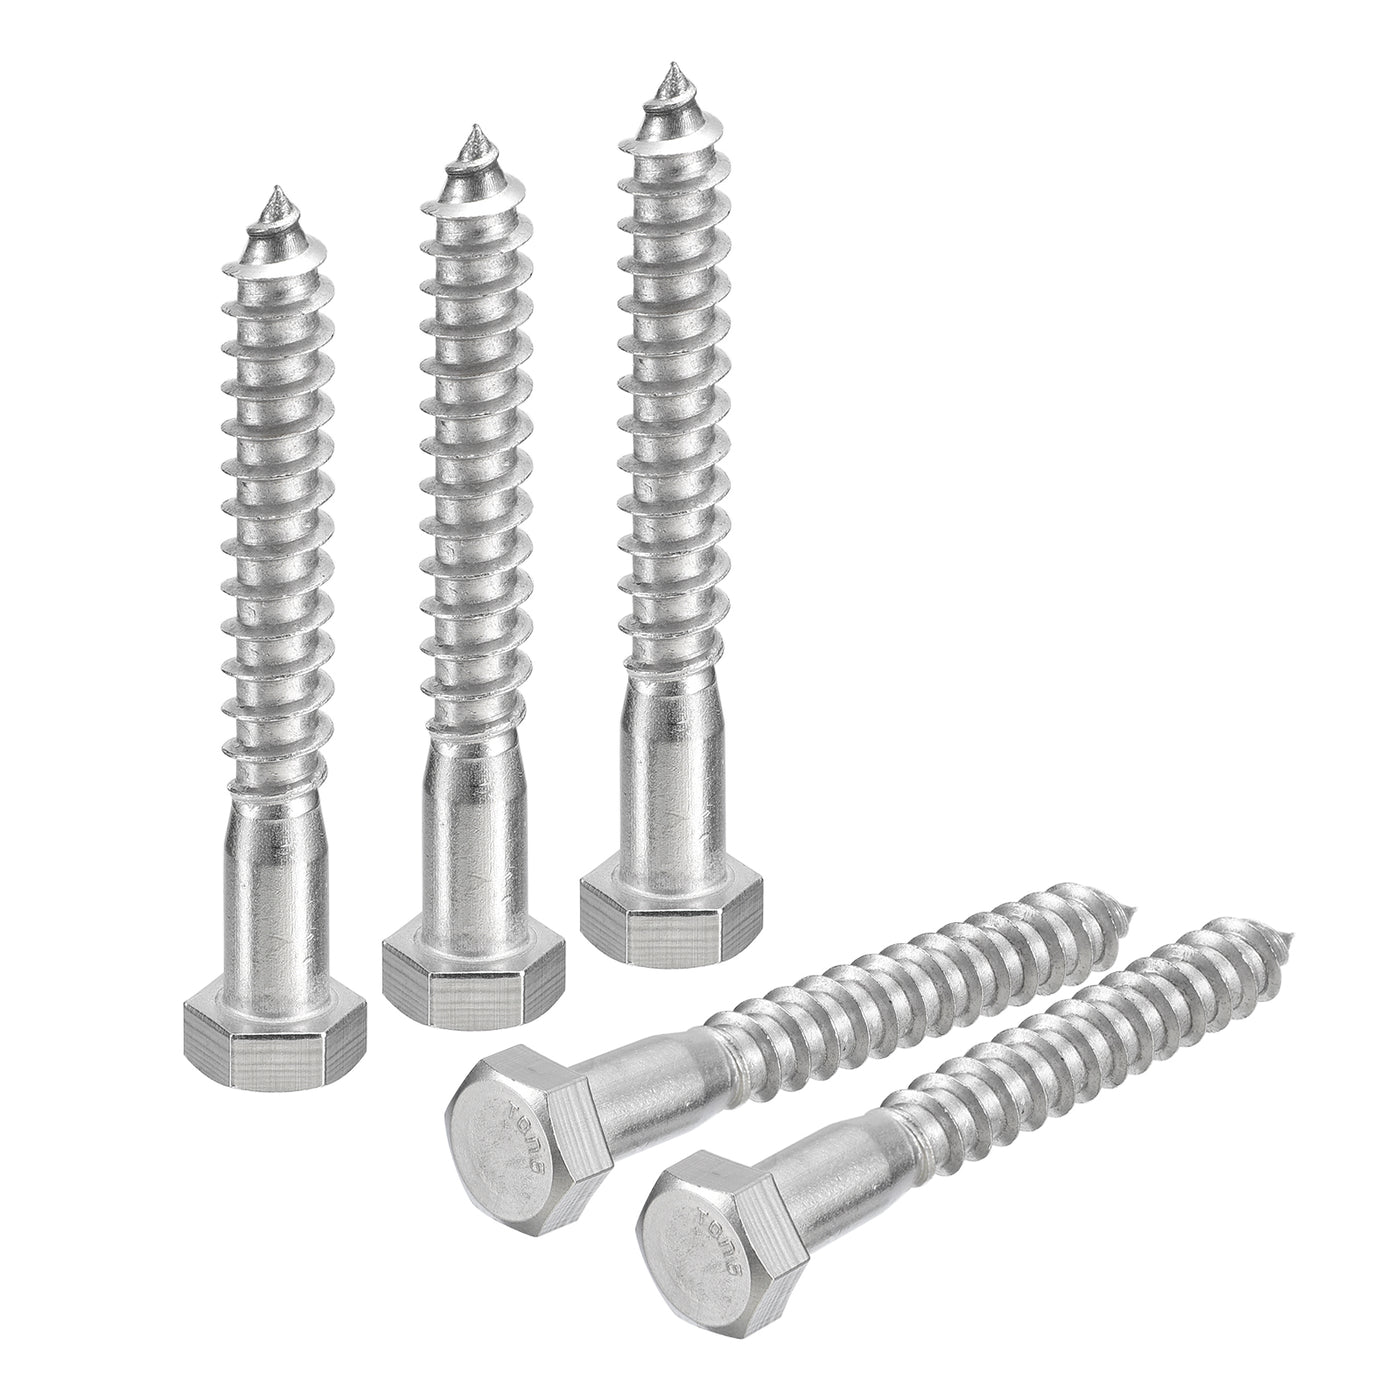 uxcell Uxcell Hex Head Lag Screws Bolts, 20pcs 3/8" x 3" 304 Stainless Steel Wood Screws